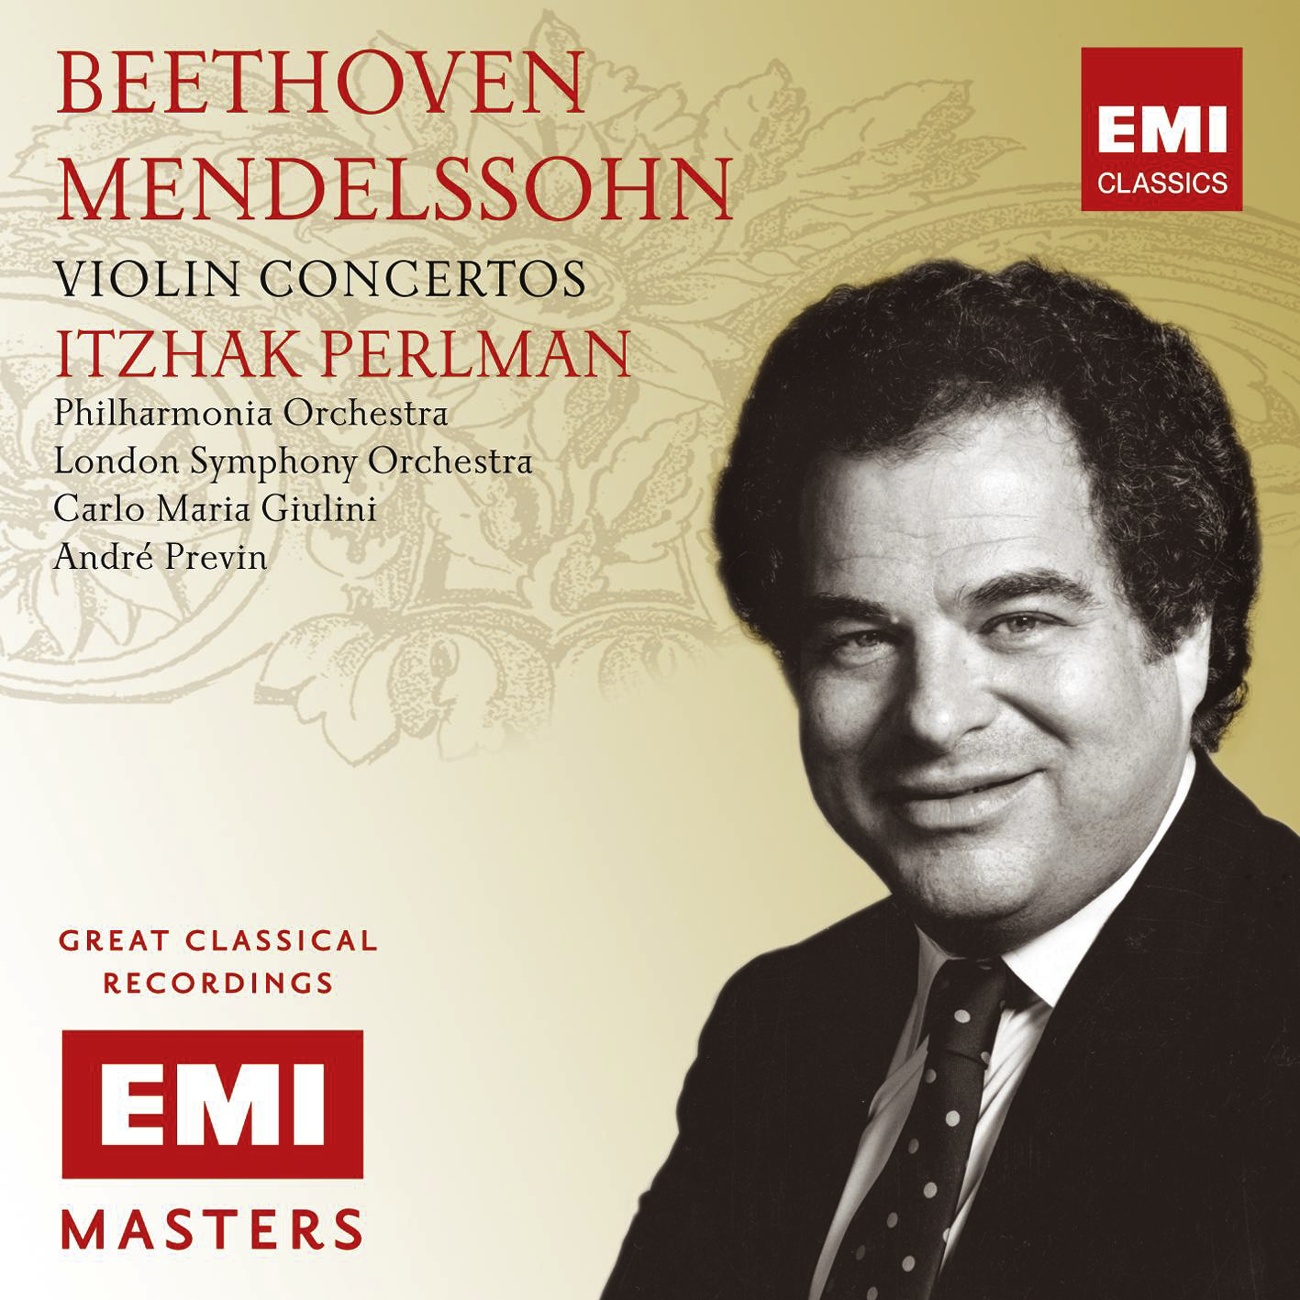 Concerto for Violin and Orchestra in D major, Op. 61: Third movement: Rondo (Allegro) (Cadenza by Kreisler)